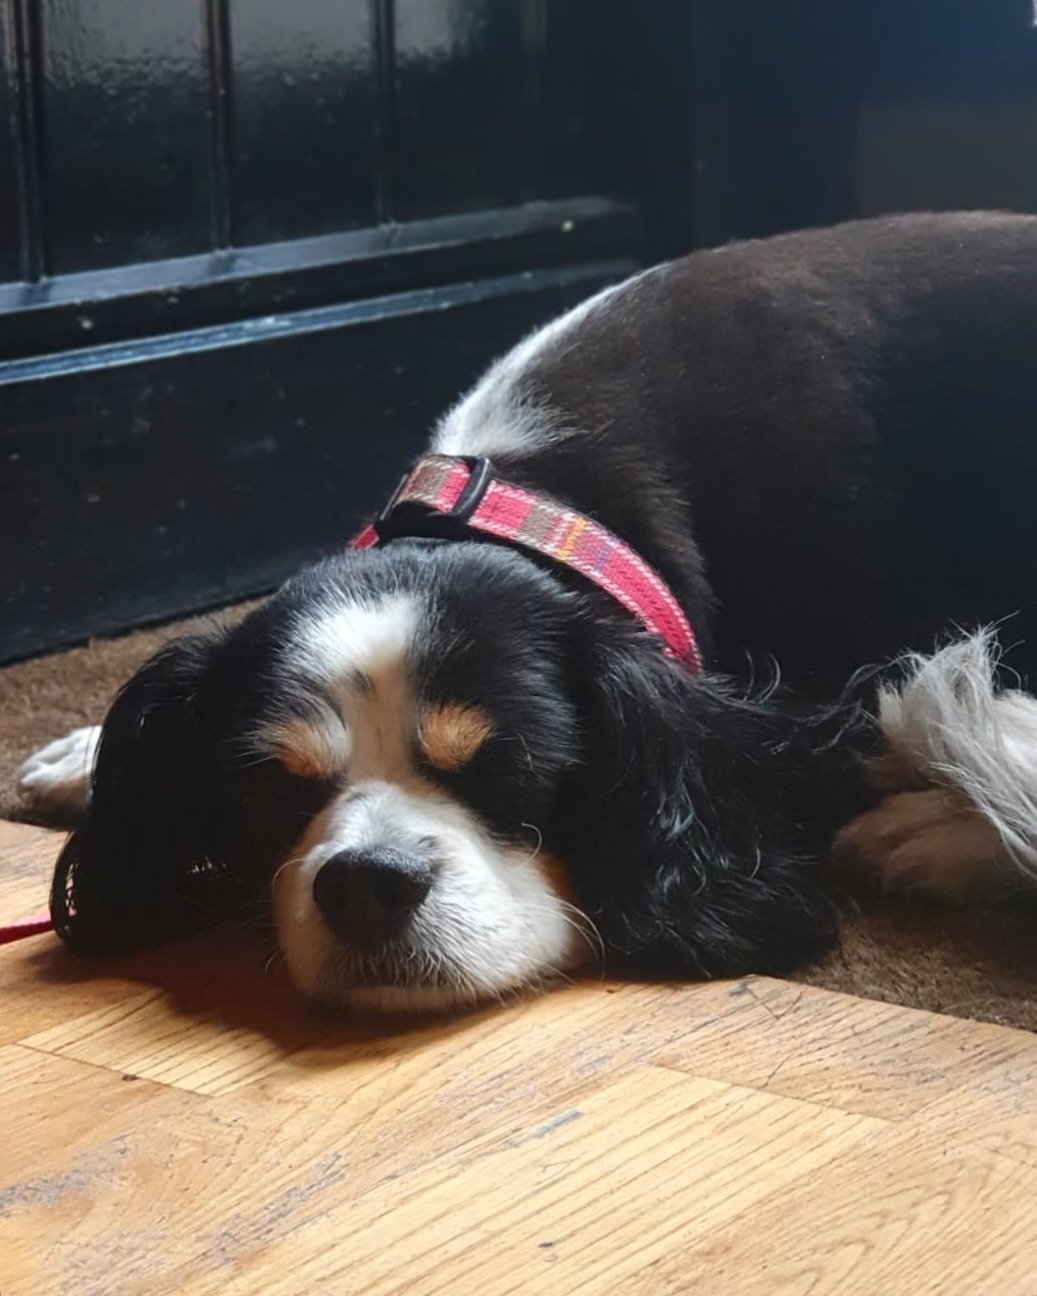 Snoozing our way into the week after a crazy sunny weekend 🌞🐶 a hugge thank you to everyone who joined us, and fingers crossed for more of the same this week! 

#brunch #brunchglasgow #glasgowfood #glasgowcafe #glasgowbakery #singlend #breakfast #b